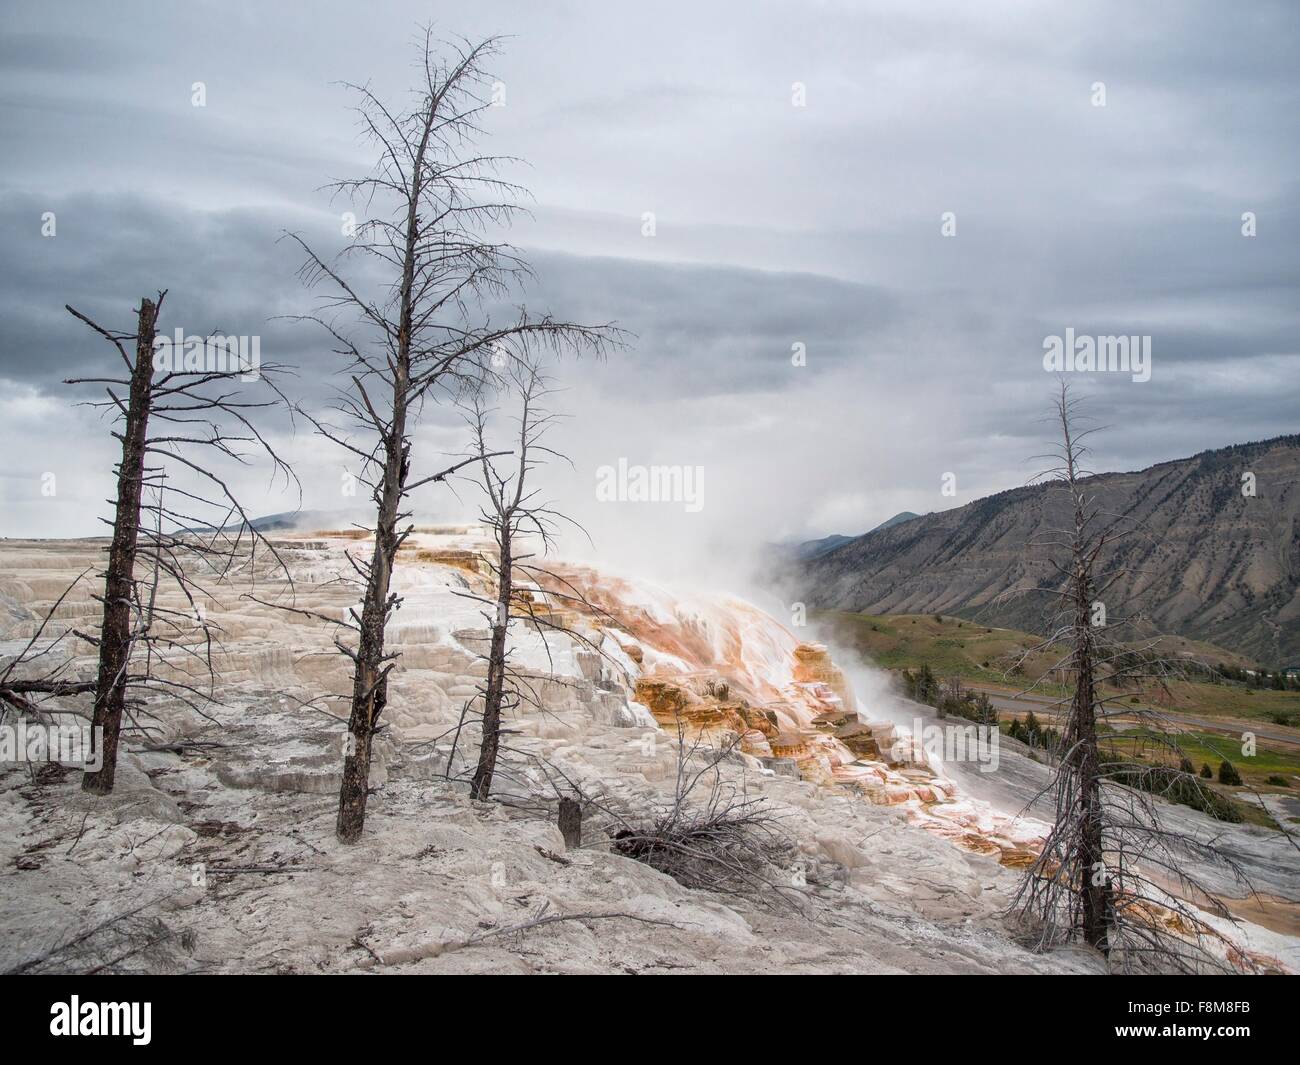 Mammoth hot springs and terraces of calcium carbon deposit, Yellowstone National Park, Wyoming, USA Stock Photo